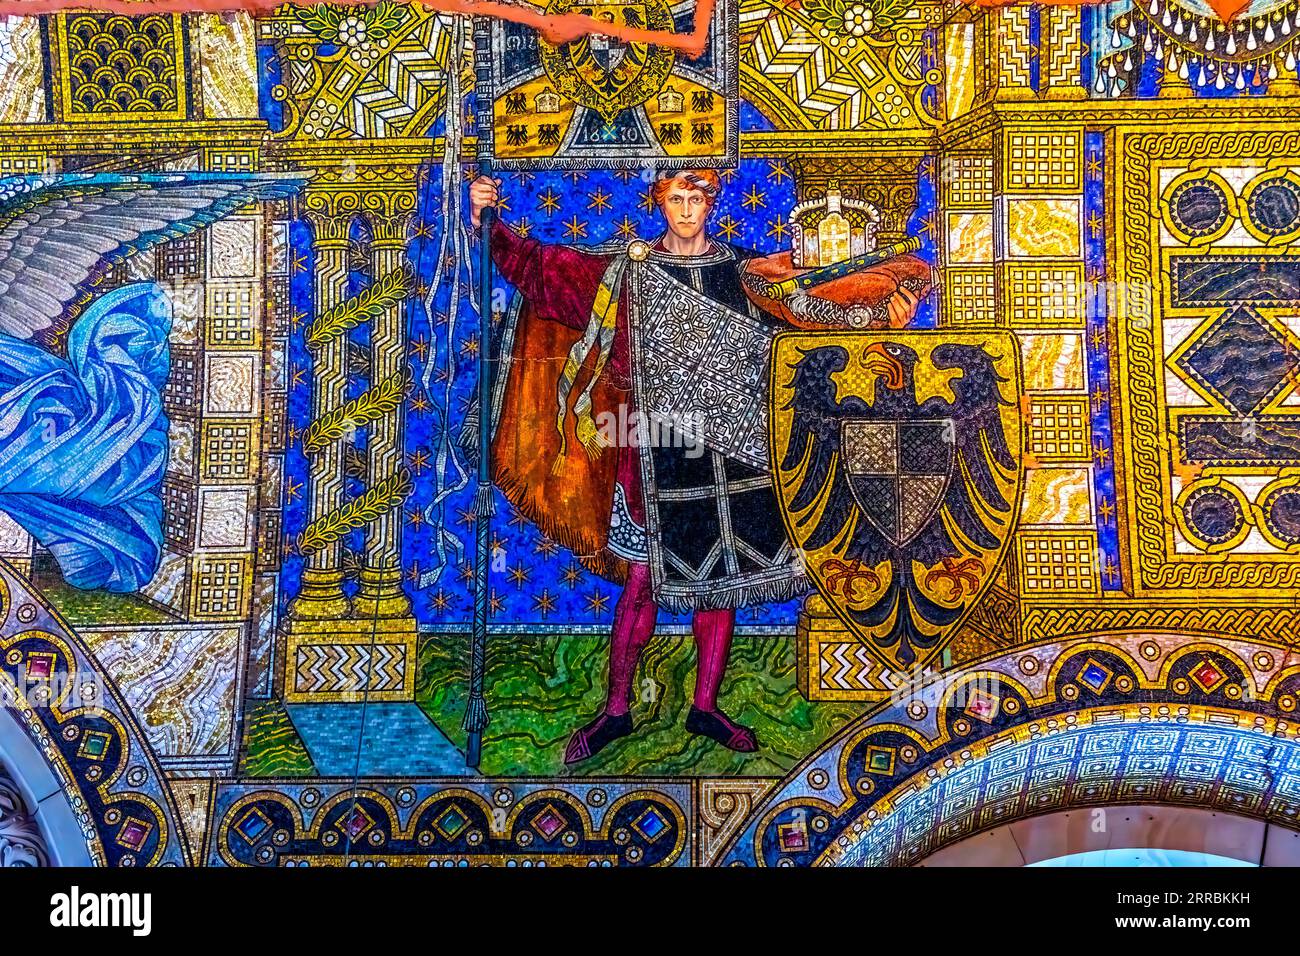 Knight Prussian Coat of Arms Mosaic Kaiser Wilhelm Memorial Church Gedächtniskirche Berlin Germany. Mosaic built in 1890s, bombed in 1943. Mosaic rest Stock Photo